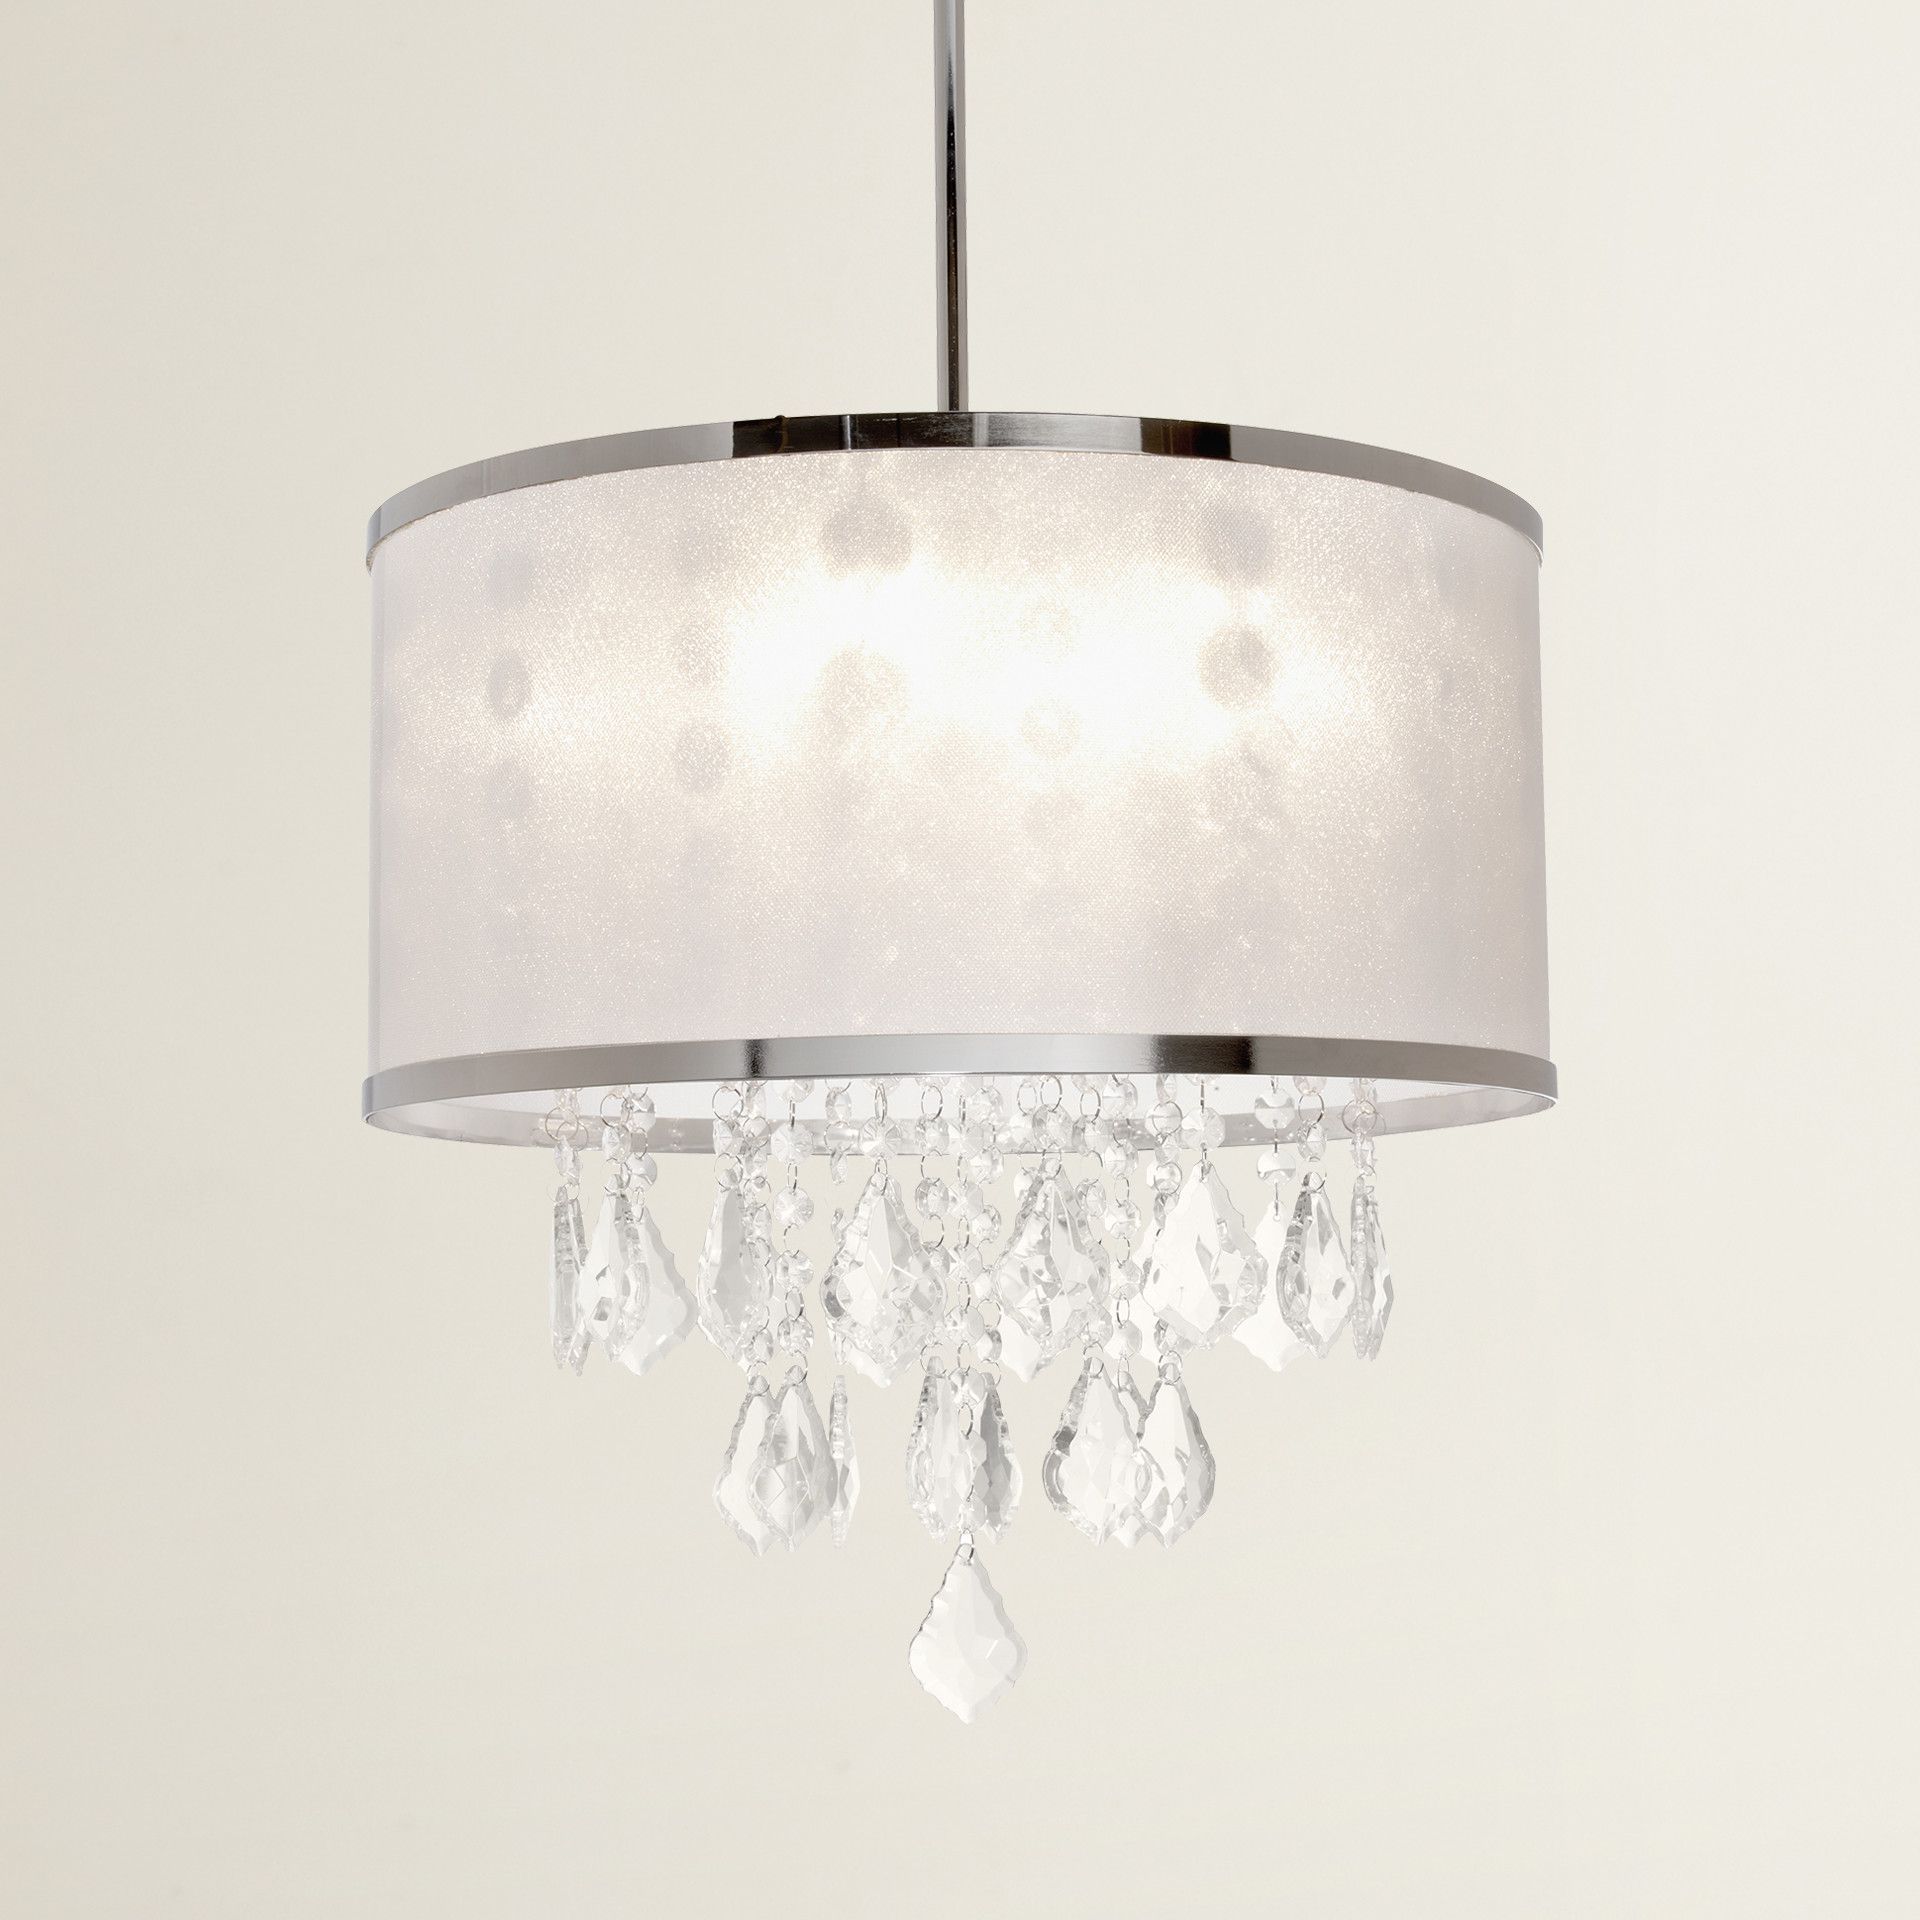 House Of Hampton® Leibowitz 4 Light Drum Chandelier Within Lindsey 4 Light Drum Chandeliers (View 3 of 30)